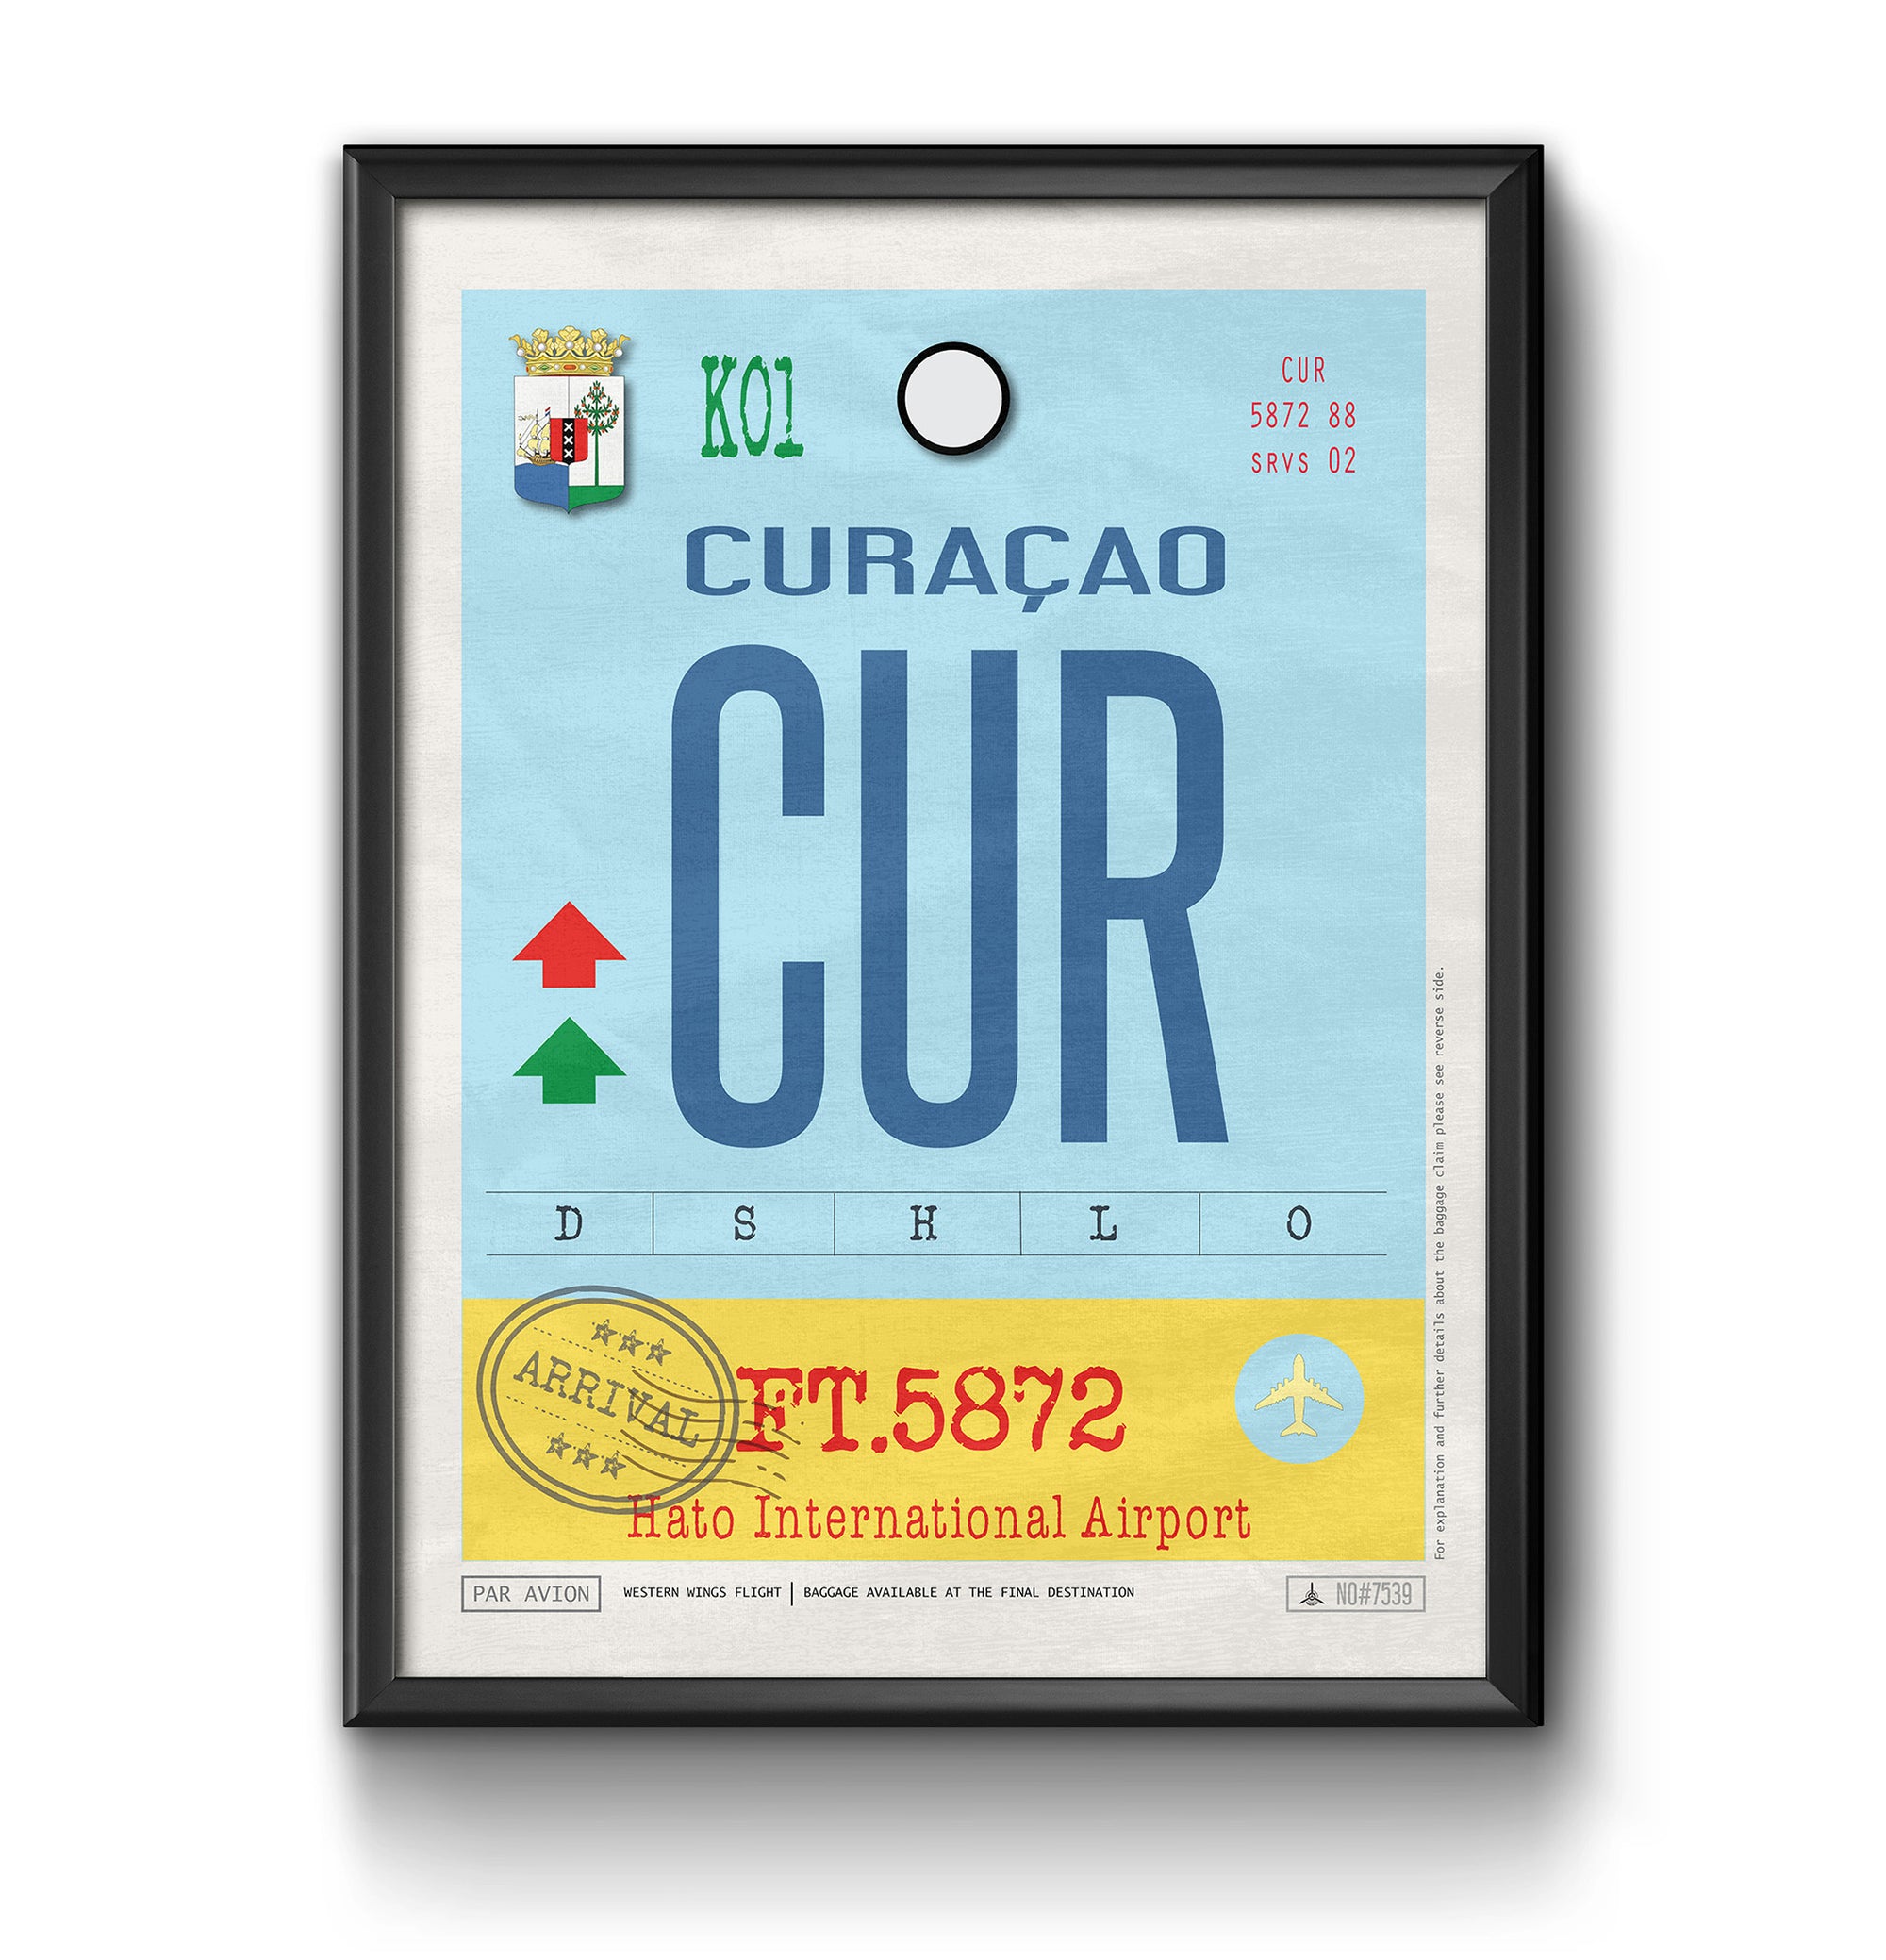 Curacao, Carribbean - CUR Airport Code Poster